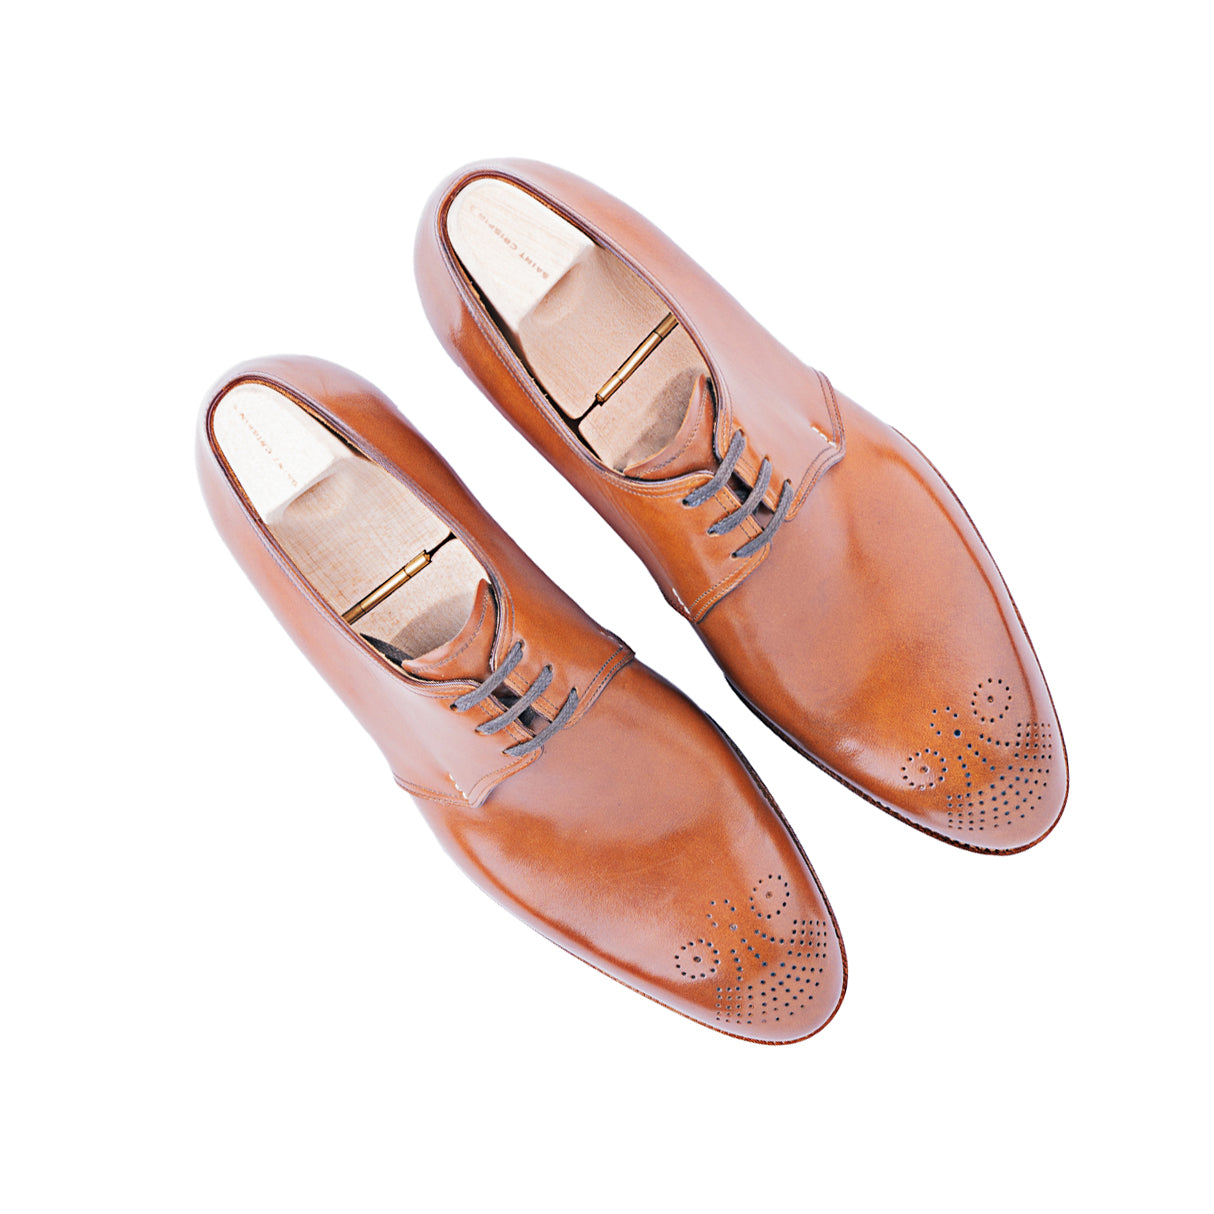 Three eyelet Derby with medallion in Cognac calf leather